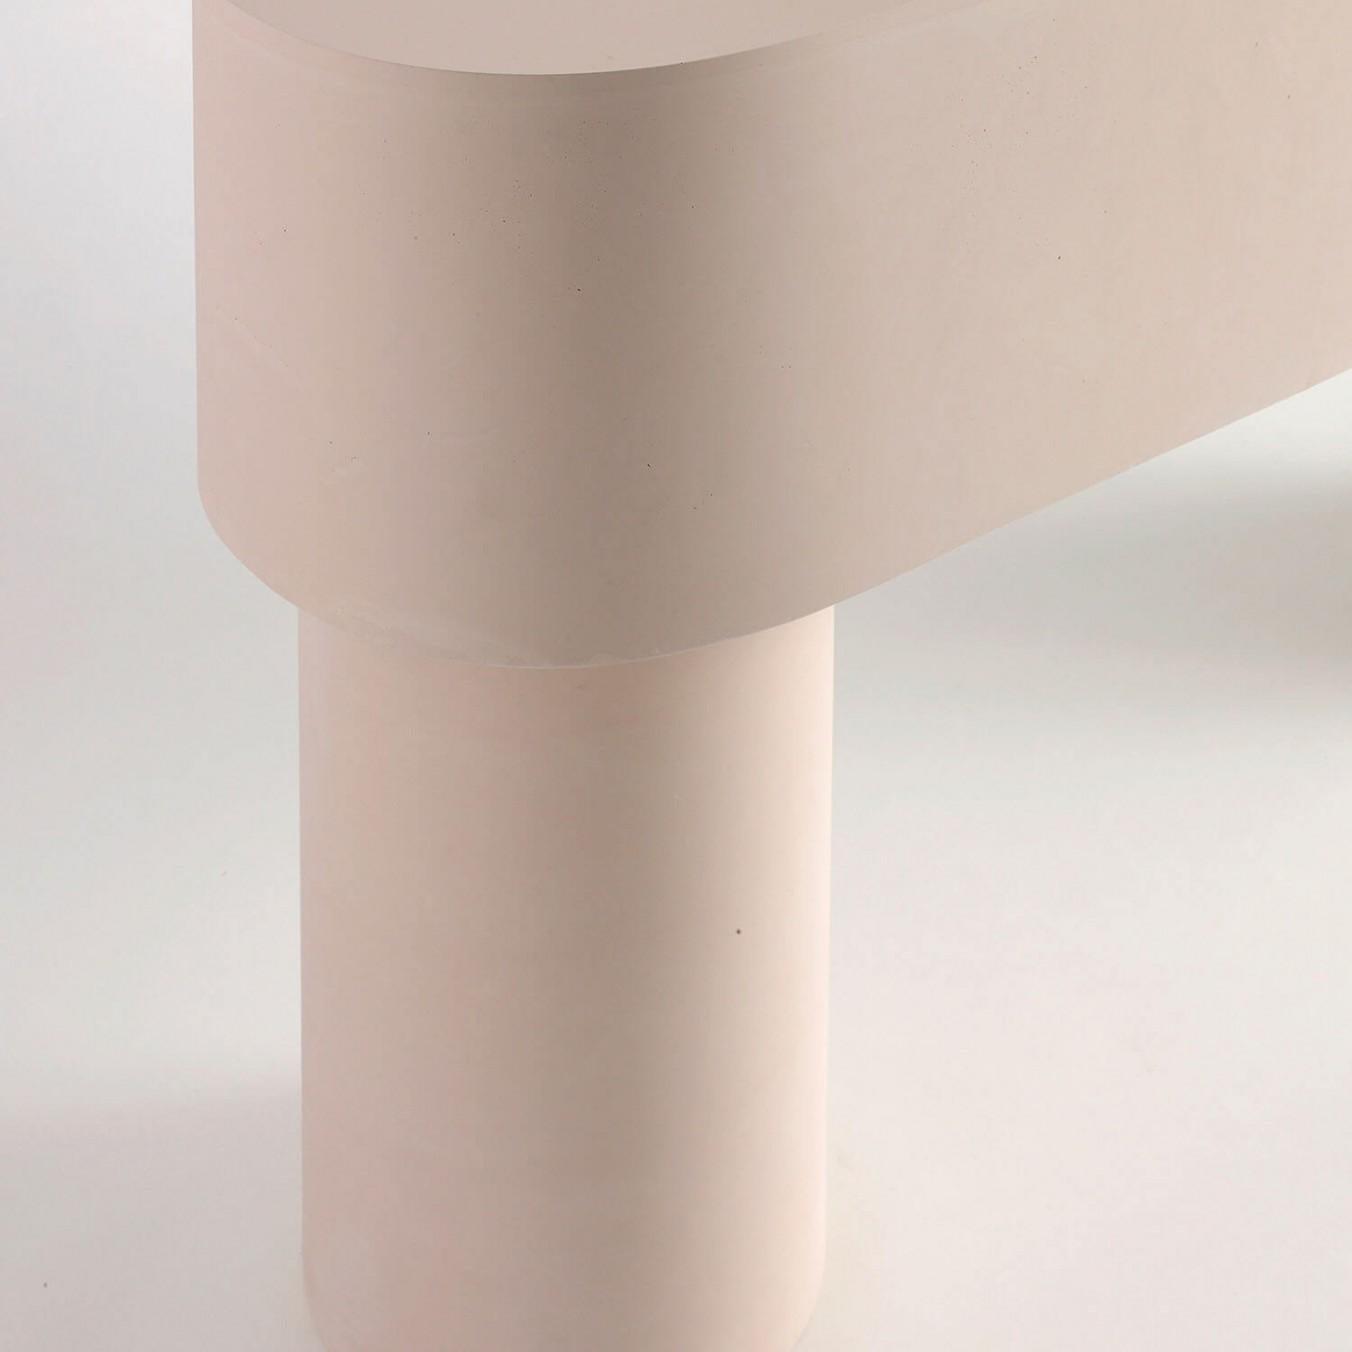 Contemporary Jesmonite Console - Pilotis console table by Malgorzata Bany.

Inspired by support columns that lift a building above ground or water. Each piece is formed using a mould made of paper, used only once, making each piece unique.